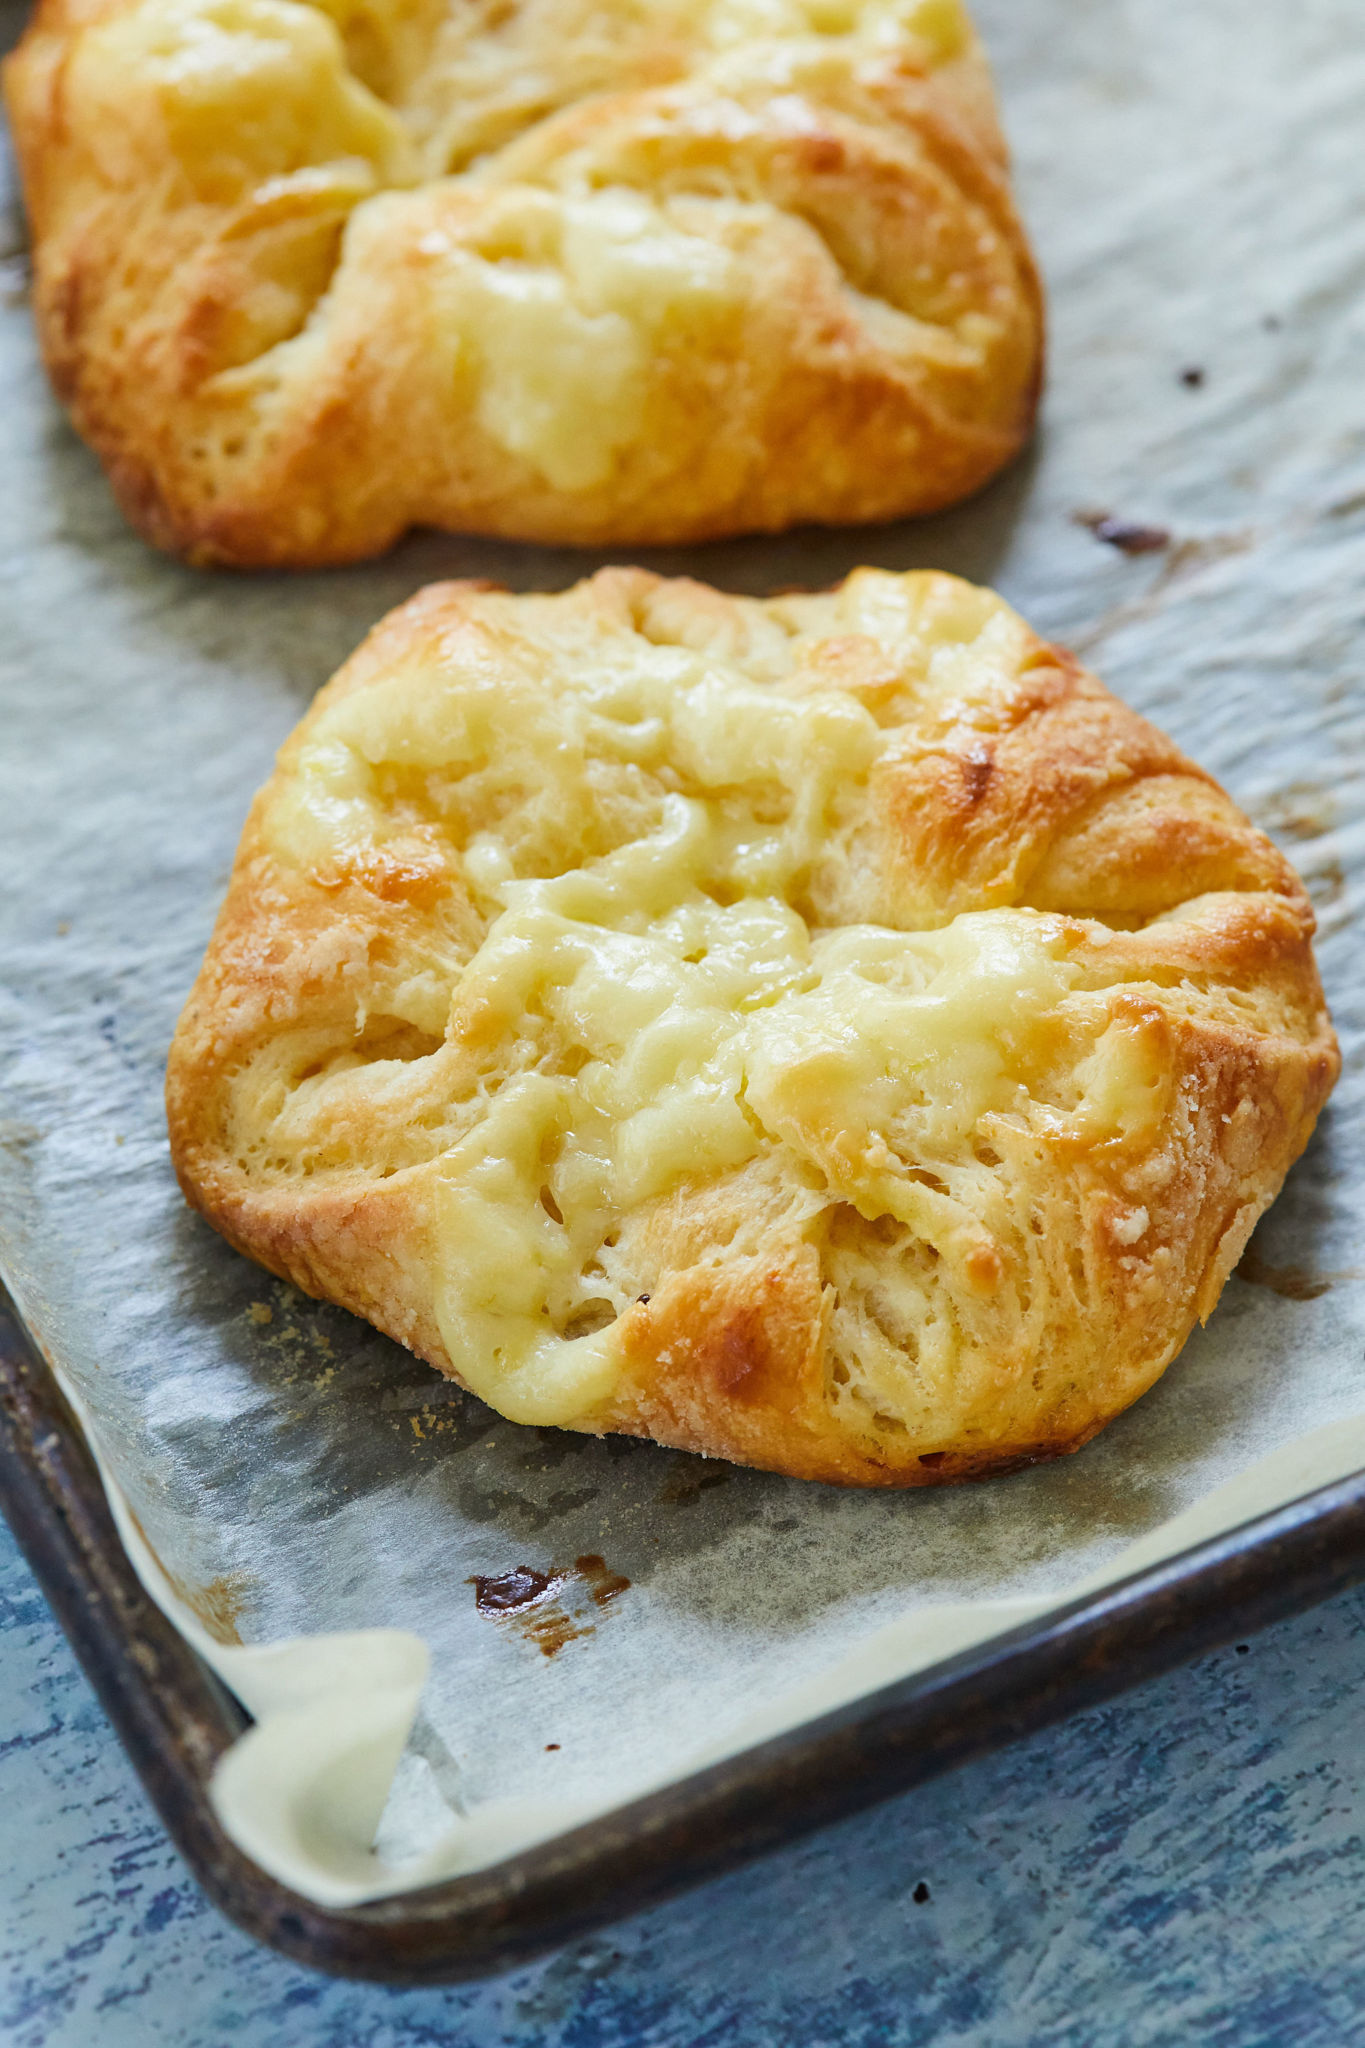 A lovely baked Cheese Danish.